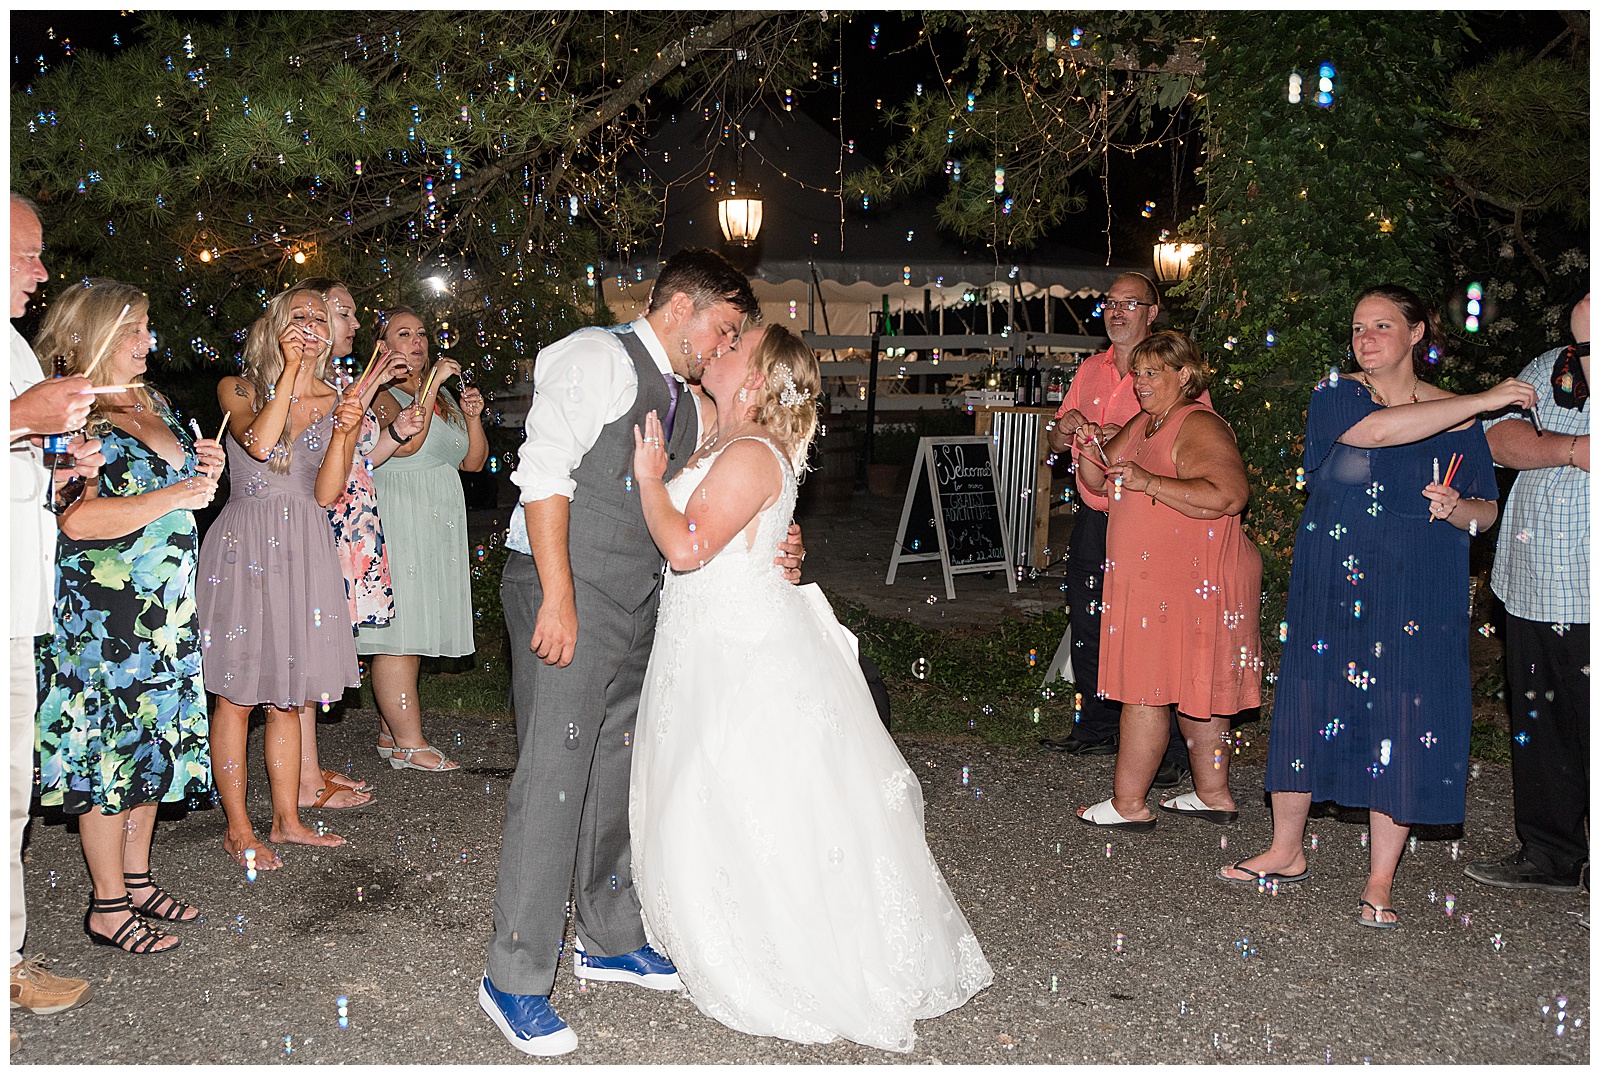 groom hugging and kissing his bride while dancing at reception in the dark surrounded by guests and bubbles